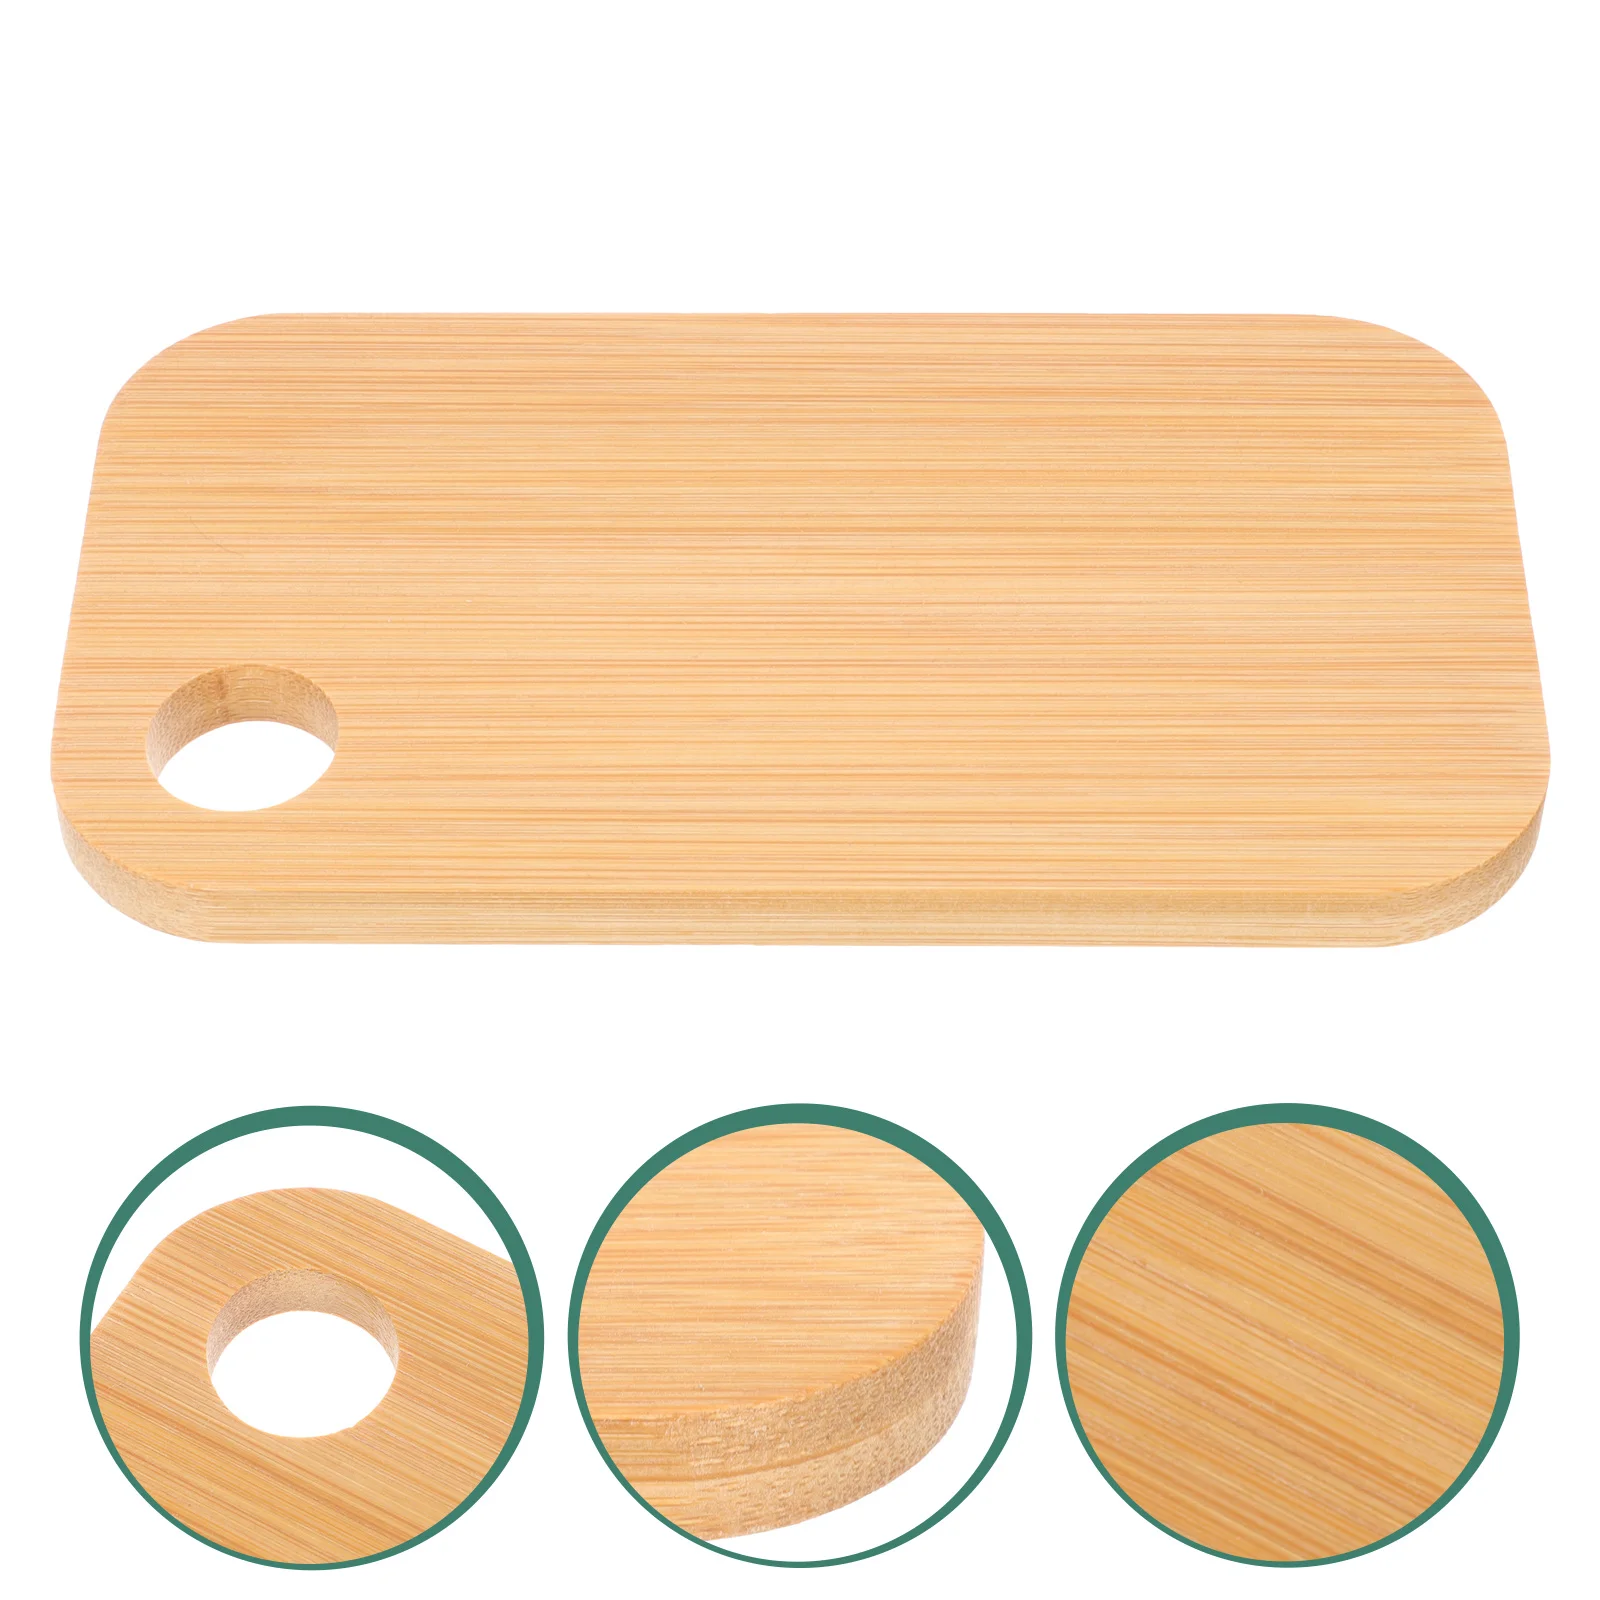 

Board Cutting Chopping Kitchenwooden Fruit Boards Wood Picnic Vegetable Mat Platter Serving Cheese Mini Chop Block Tray